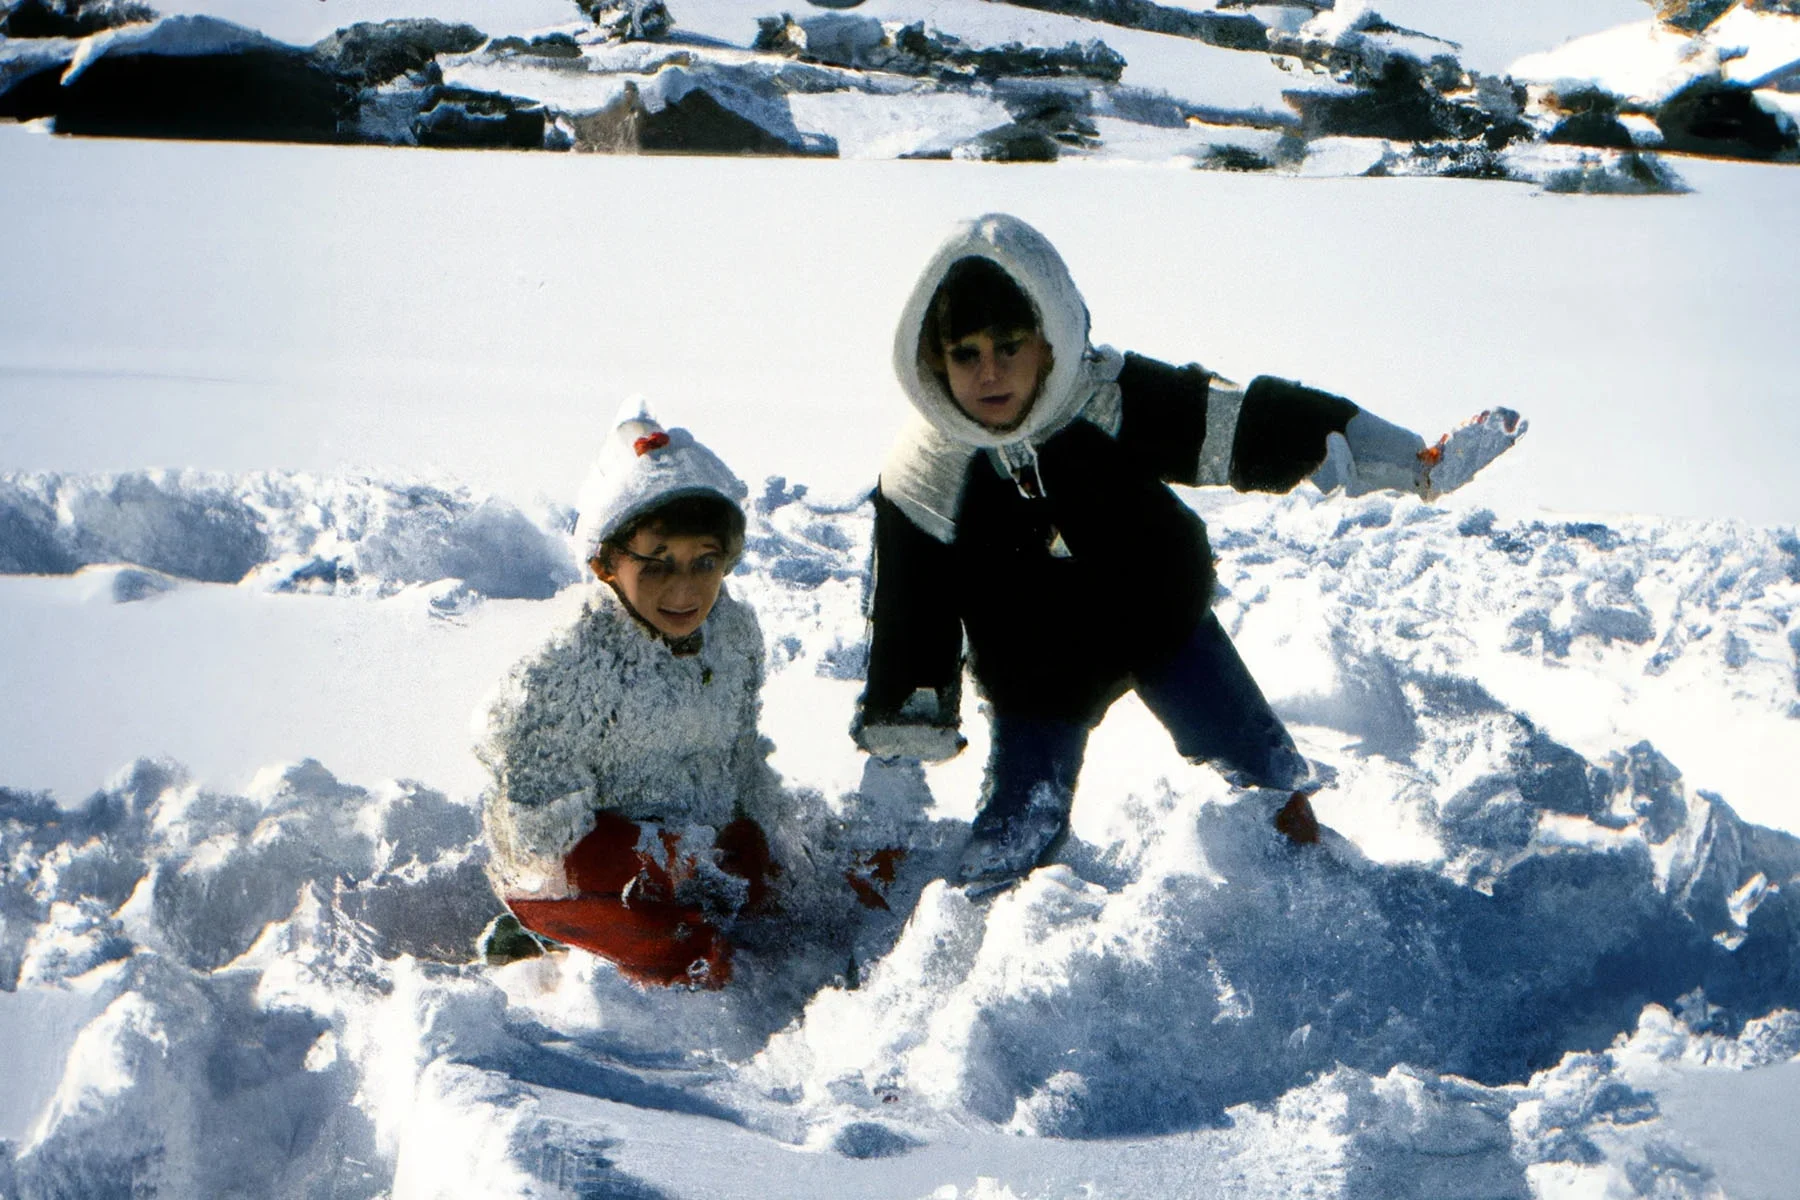 An image that looks like a photograph but is created with the use of Artificial Intelligence. The image has a 90s feel, showing a candid scene of two young kids playing in the snow on a sunny day, dressed in warm clothes and hats, looking at the camera.